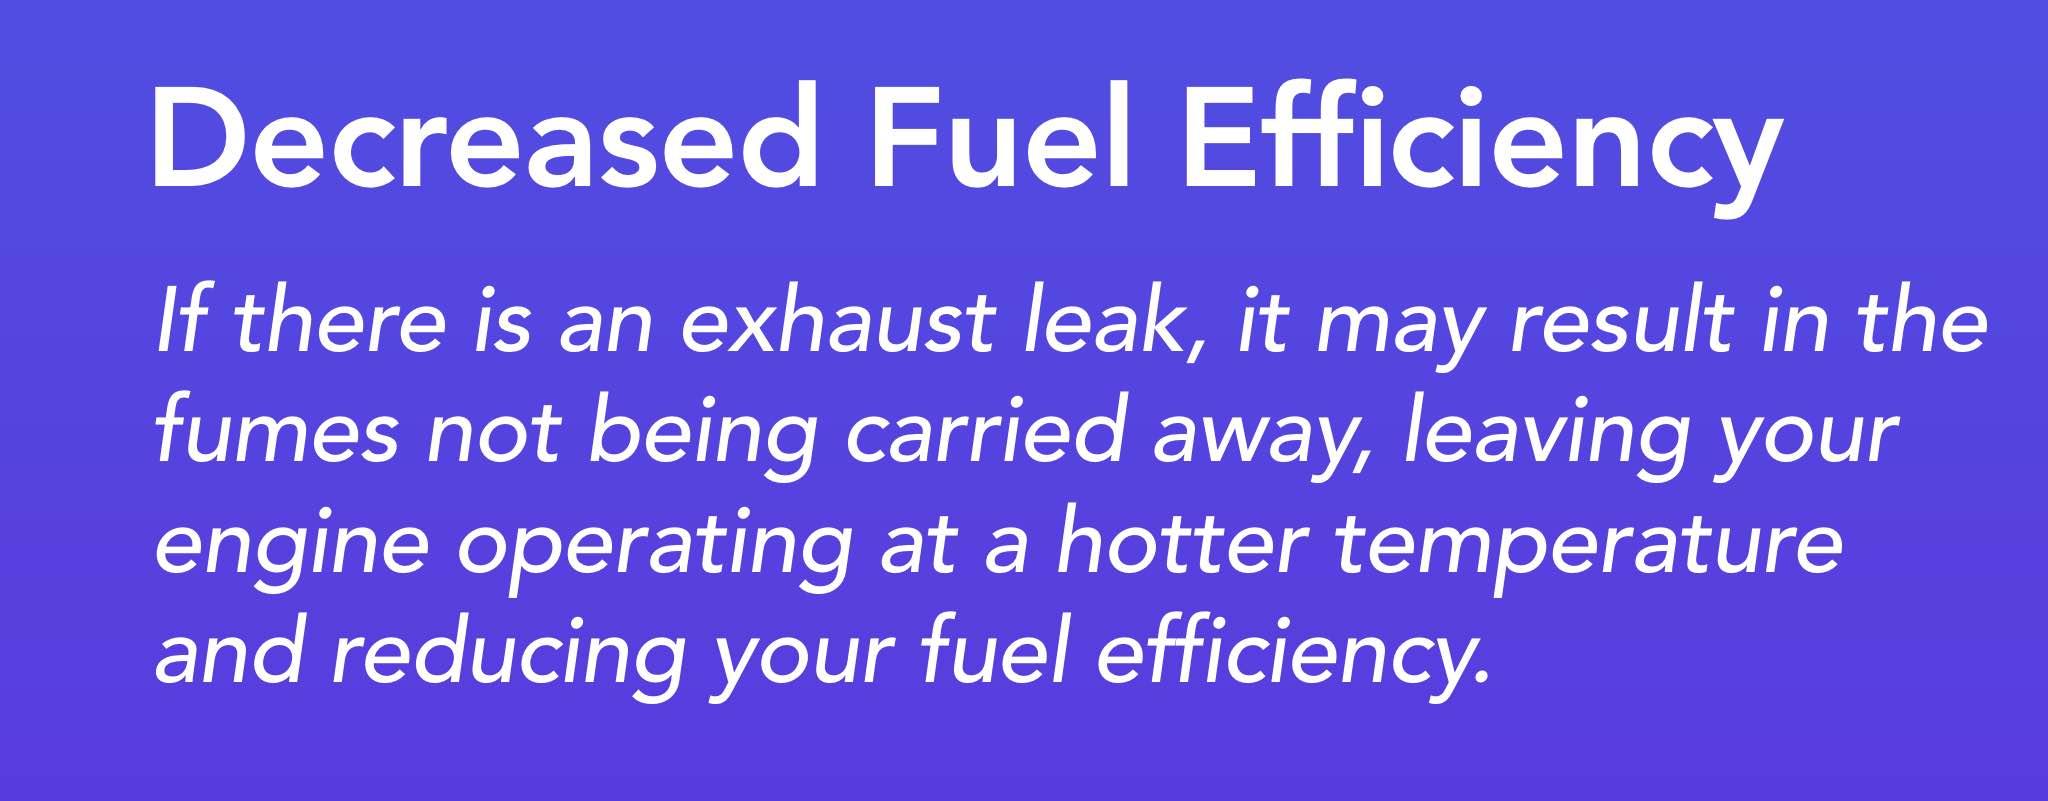 If there is an exhaust leak it may result in the fumes not being carried away, leaving your engine operating at a hotter temperature and reducing your fuel efficiency.